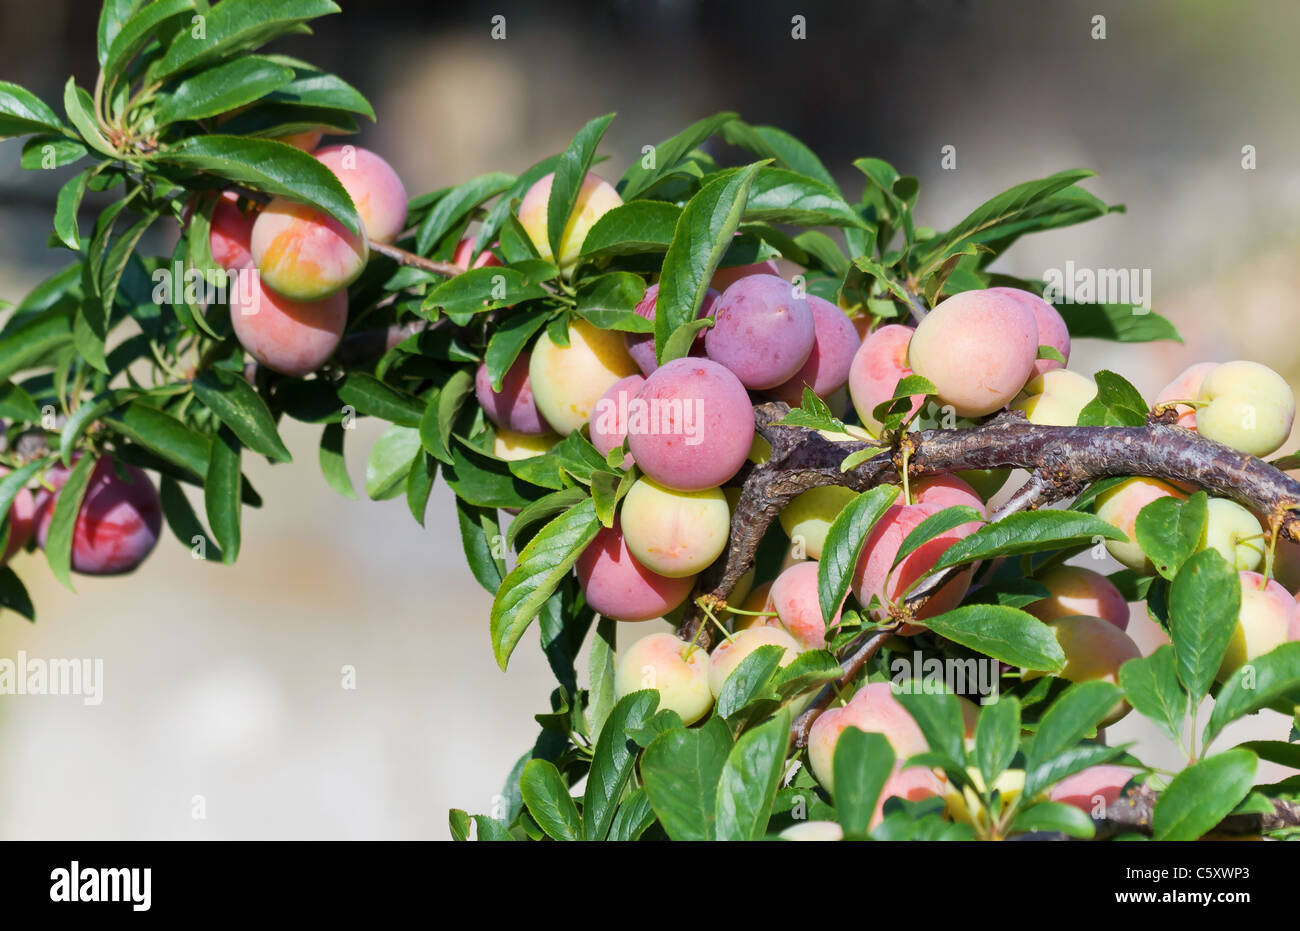 detail of ripe plums on a branch Stock Photo